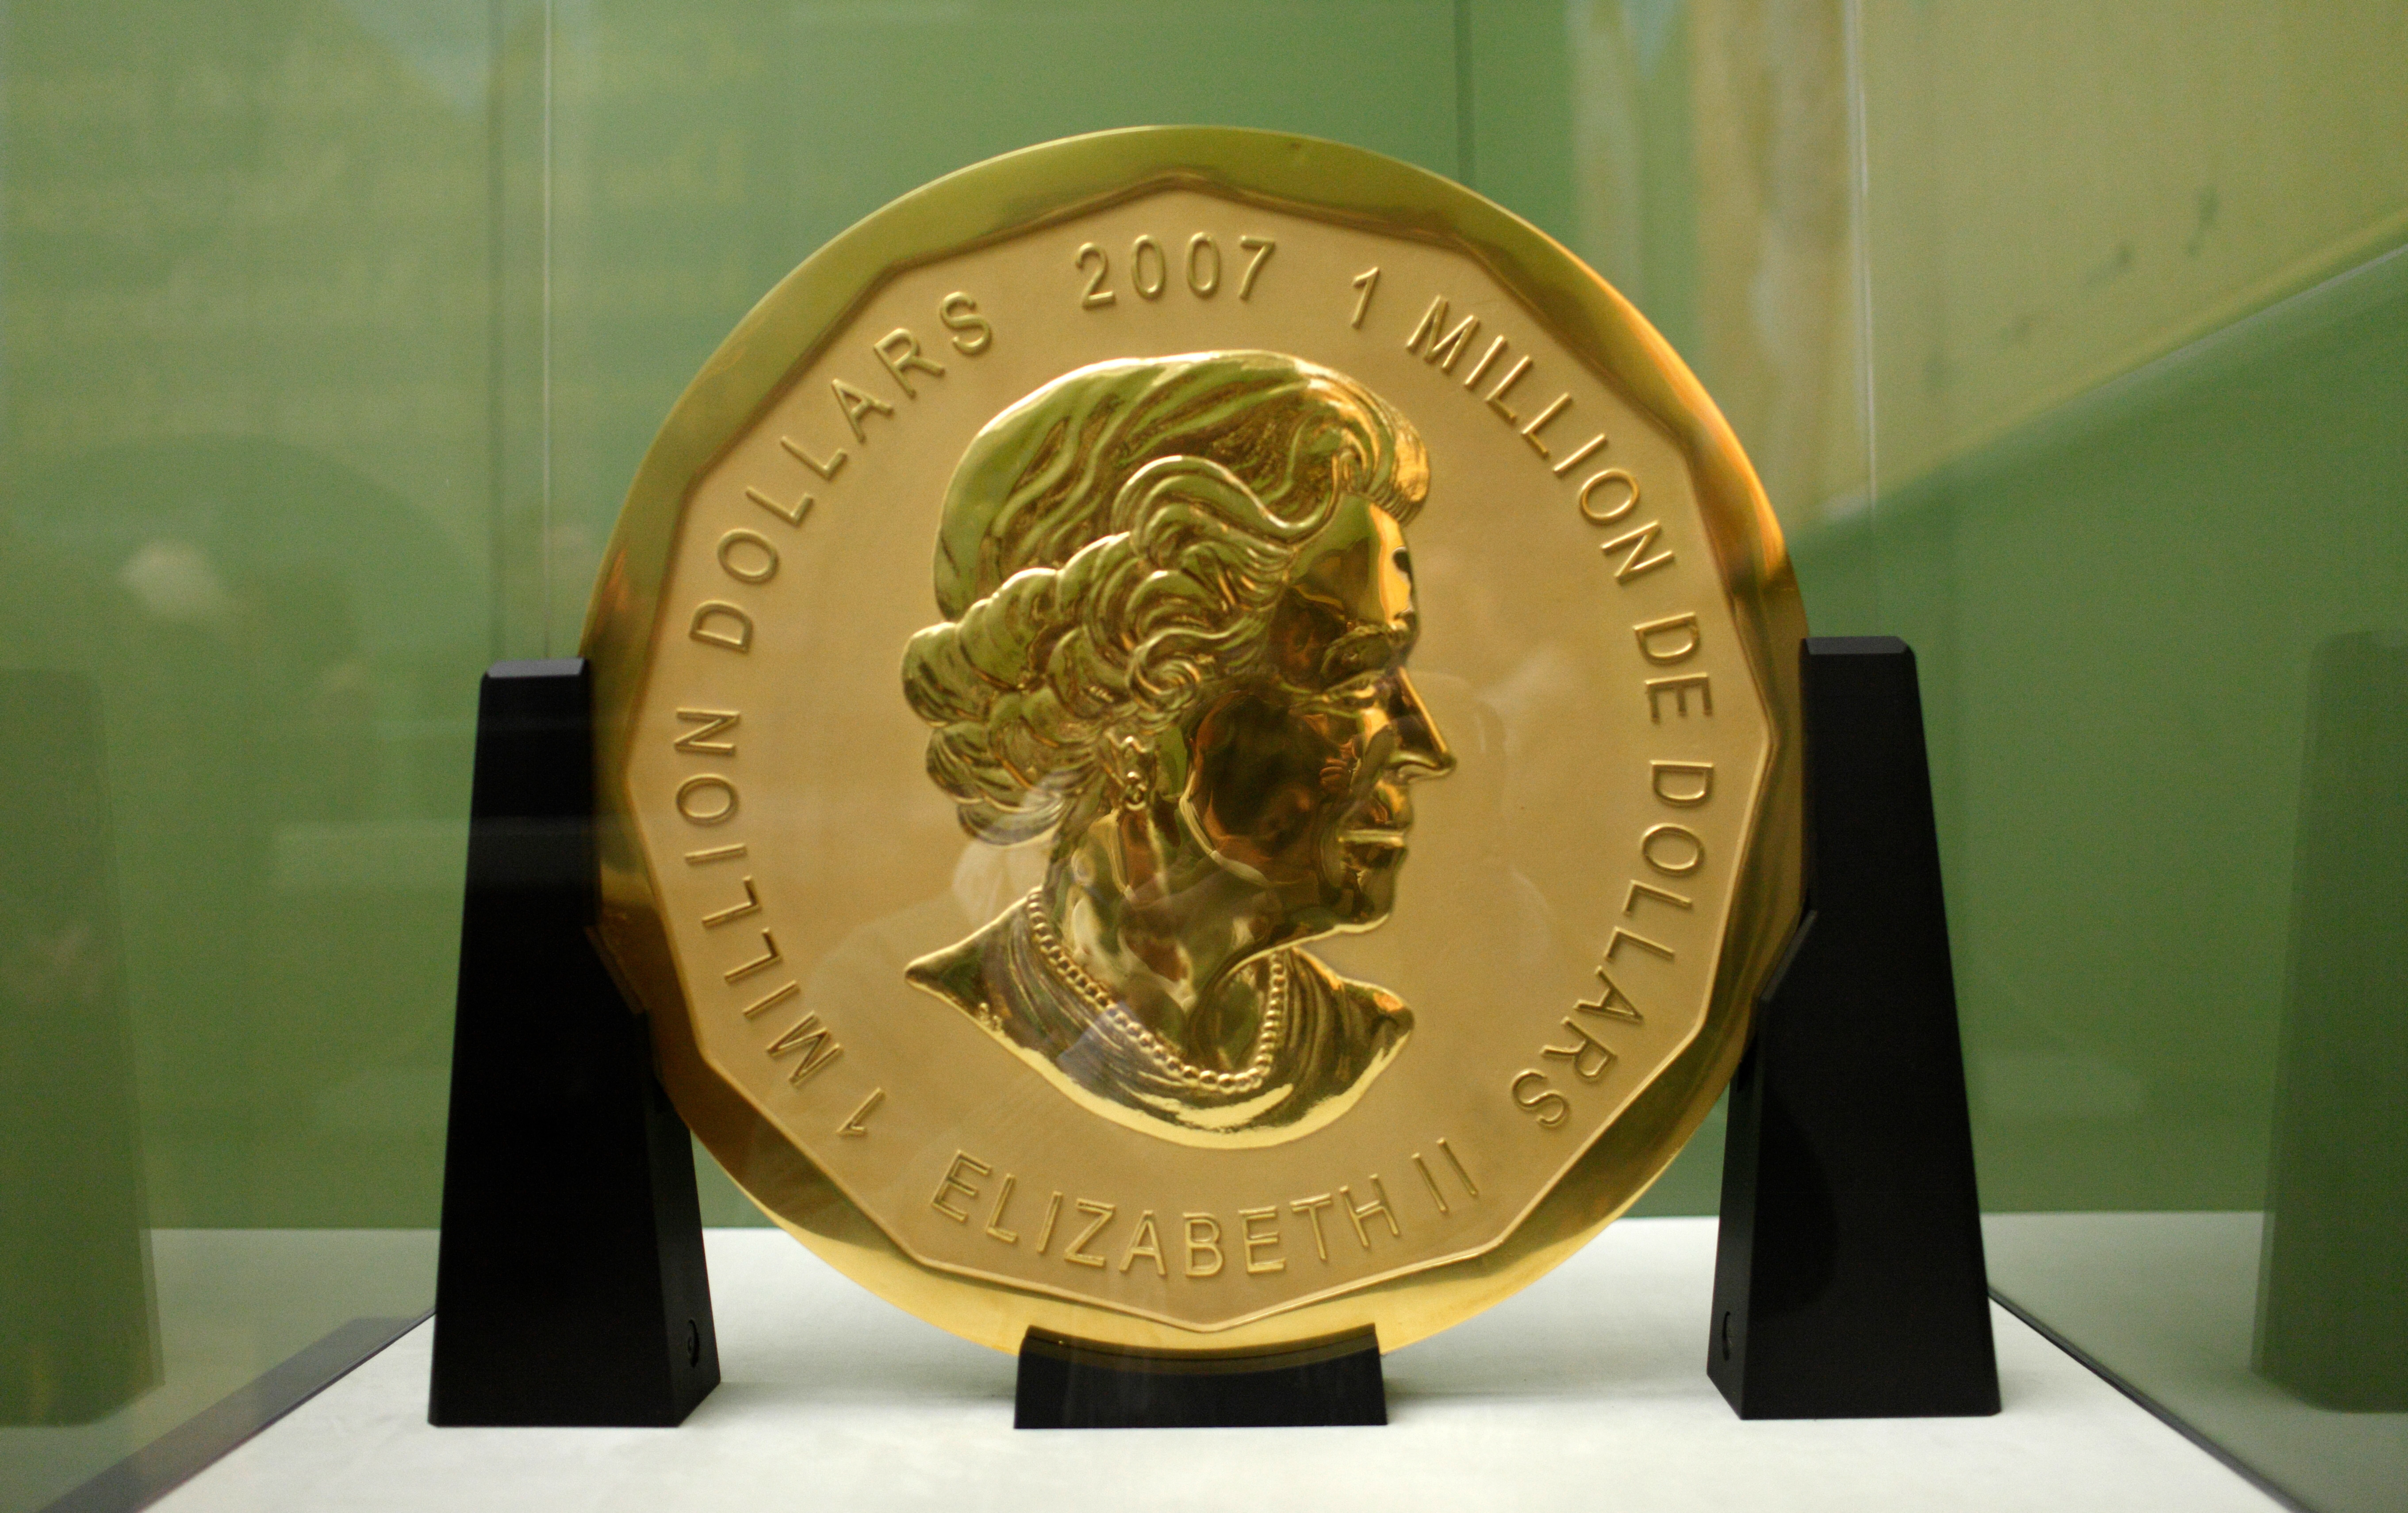 Thieves Stole Massive Gold Coin Worth Millions From Berlin Museum